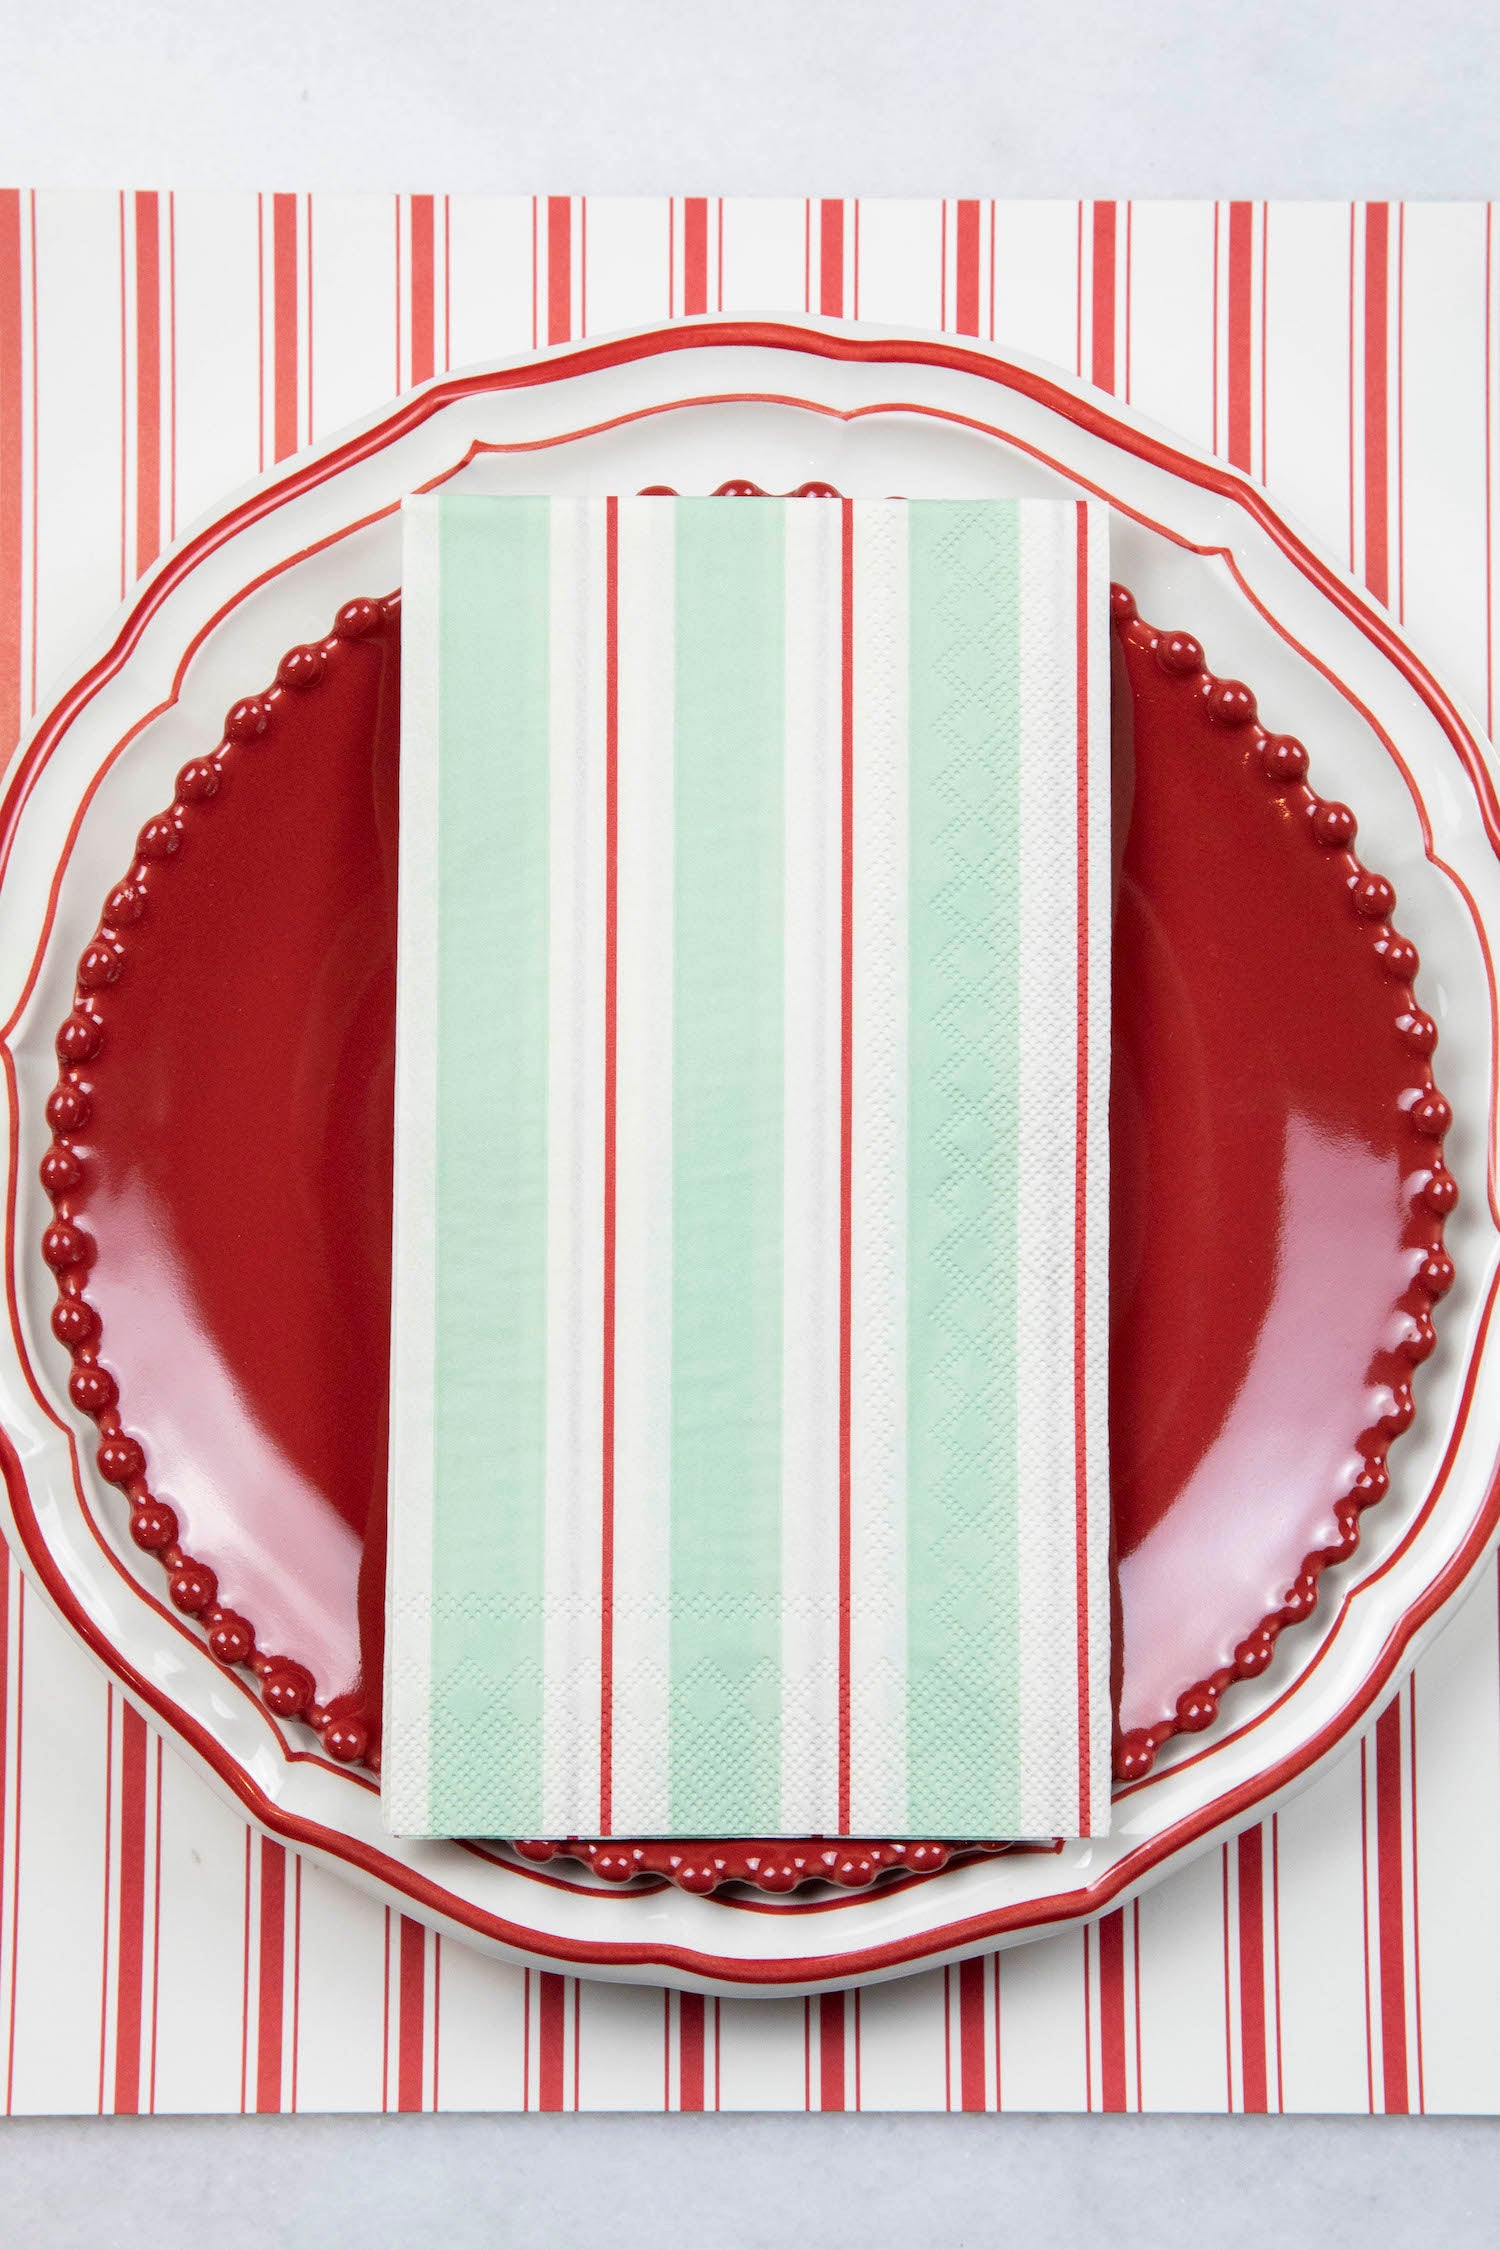 Seafoam &amp; Red Awning Stripe Napkins from Hester &amp; Cook for a festive table setting at a party.